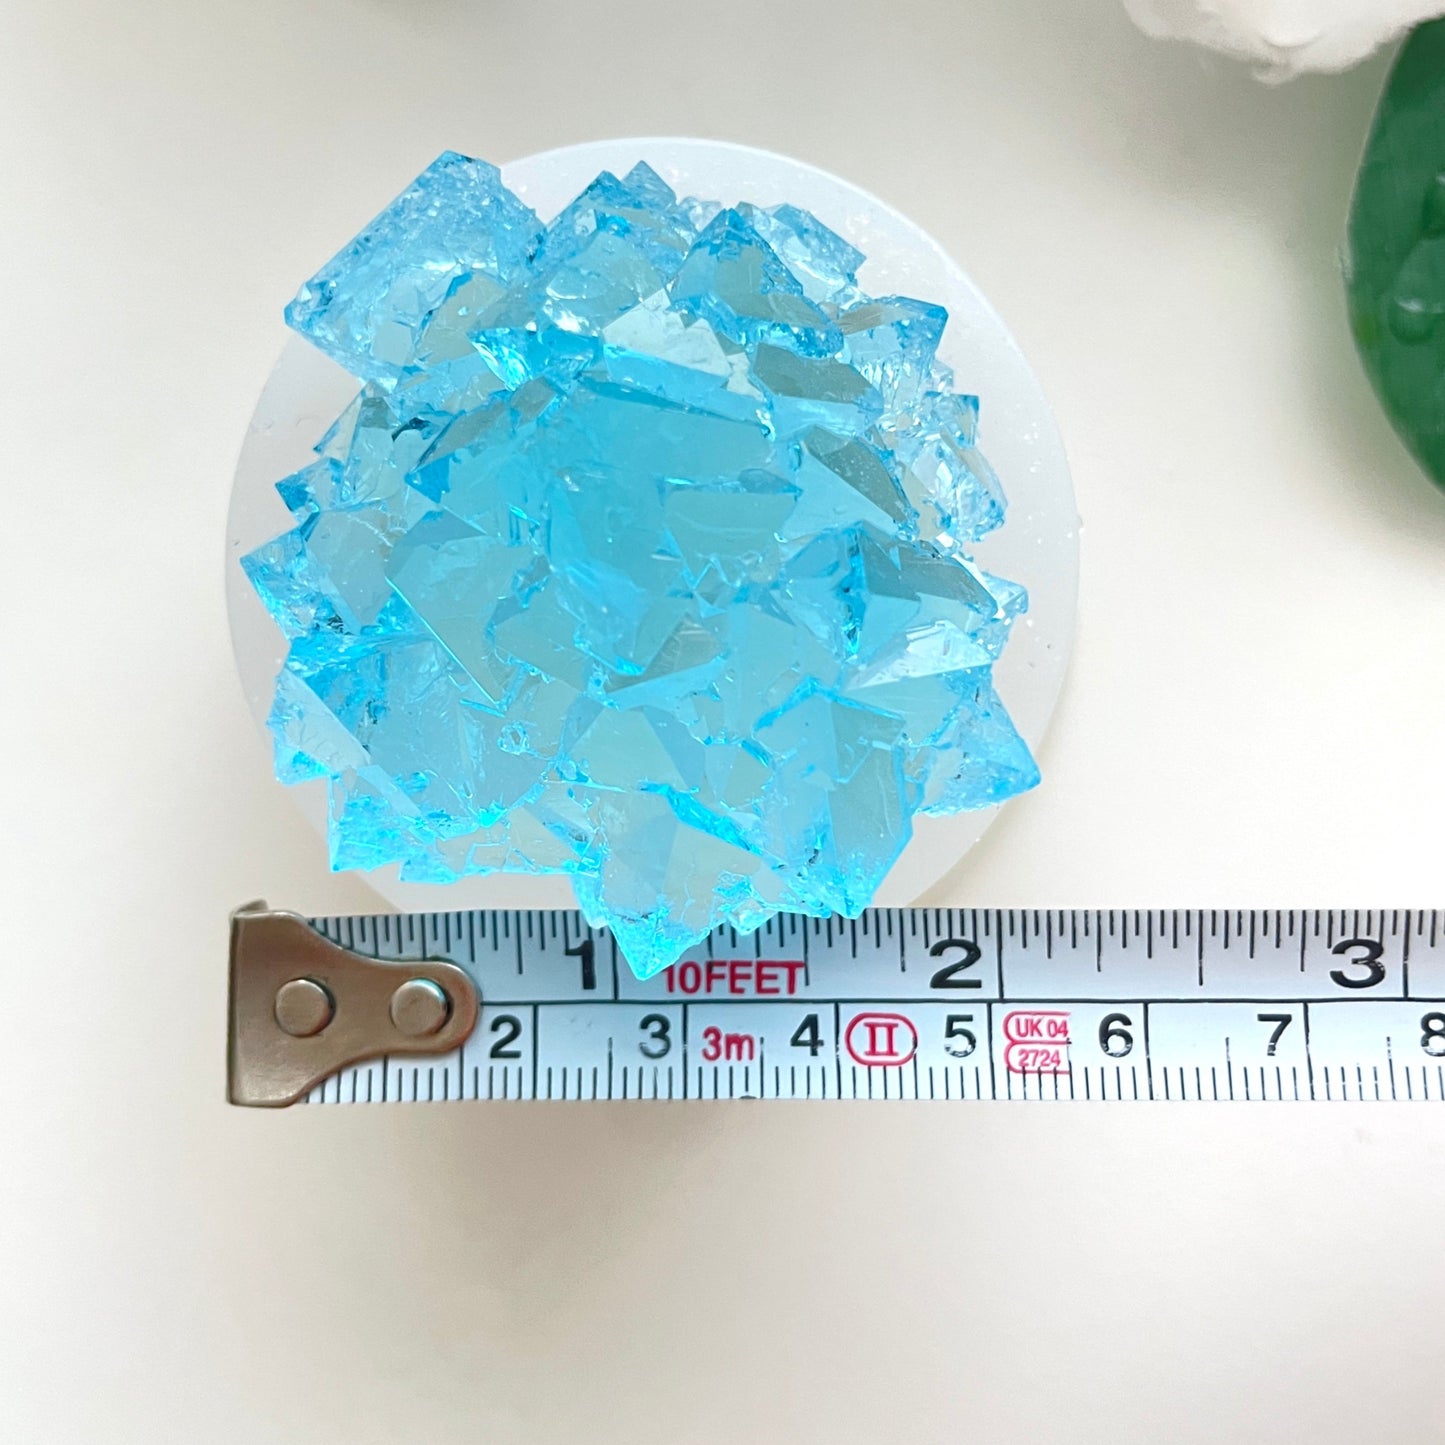 Tiny Treasures: Little Crystal Cluster Silicone Mold